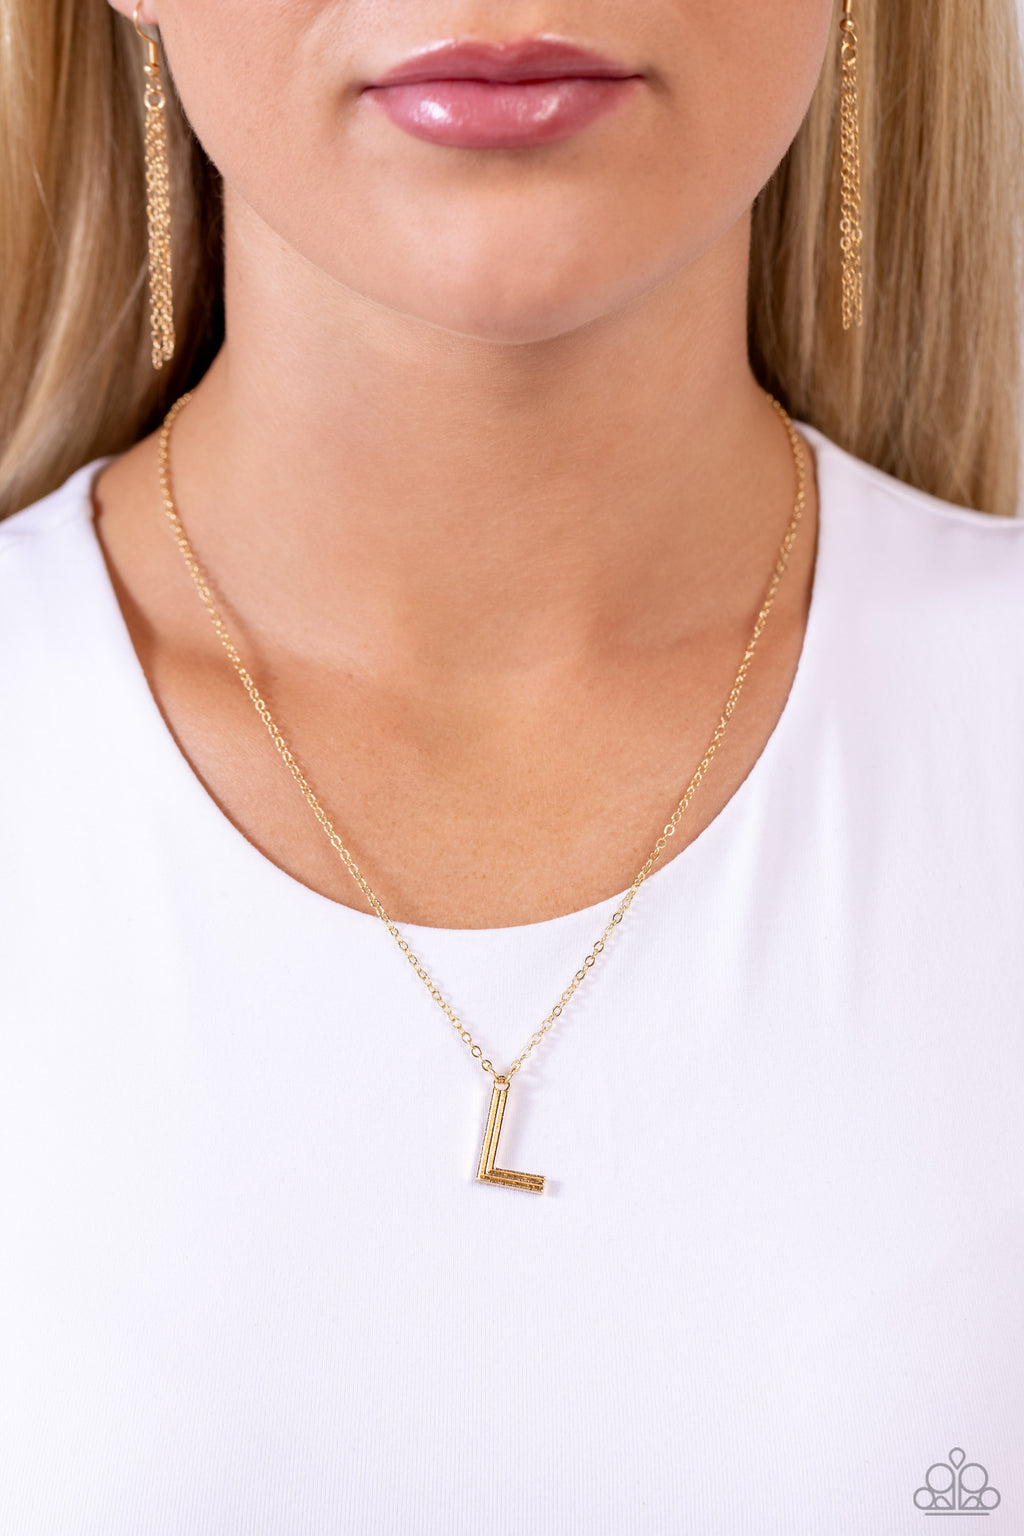 Paparazzi - Leave Your Initials - Gold - L Necklace